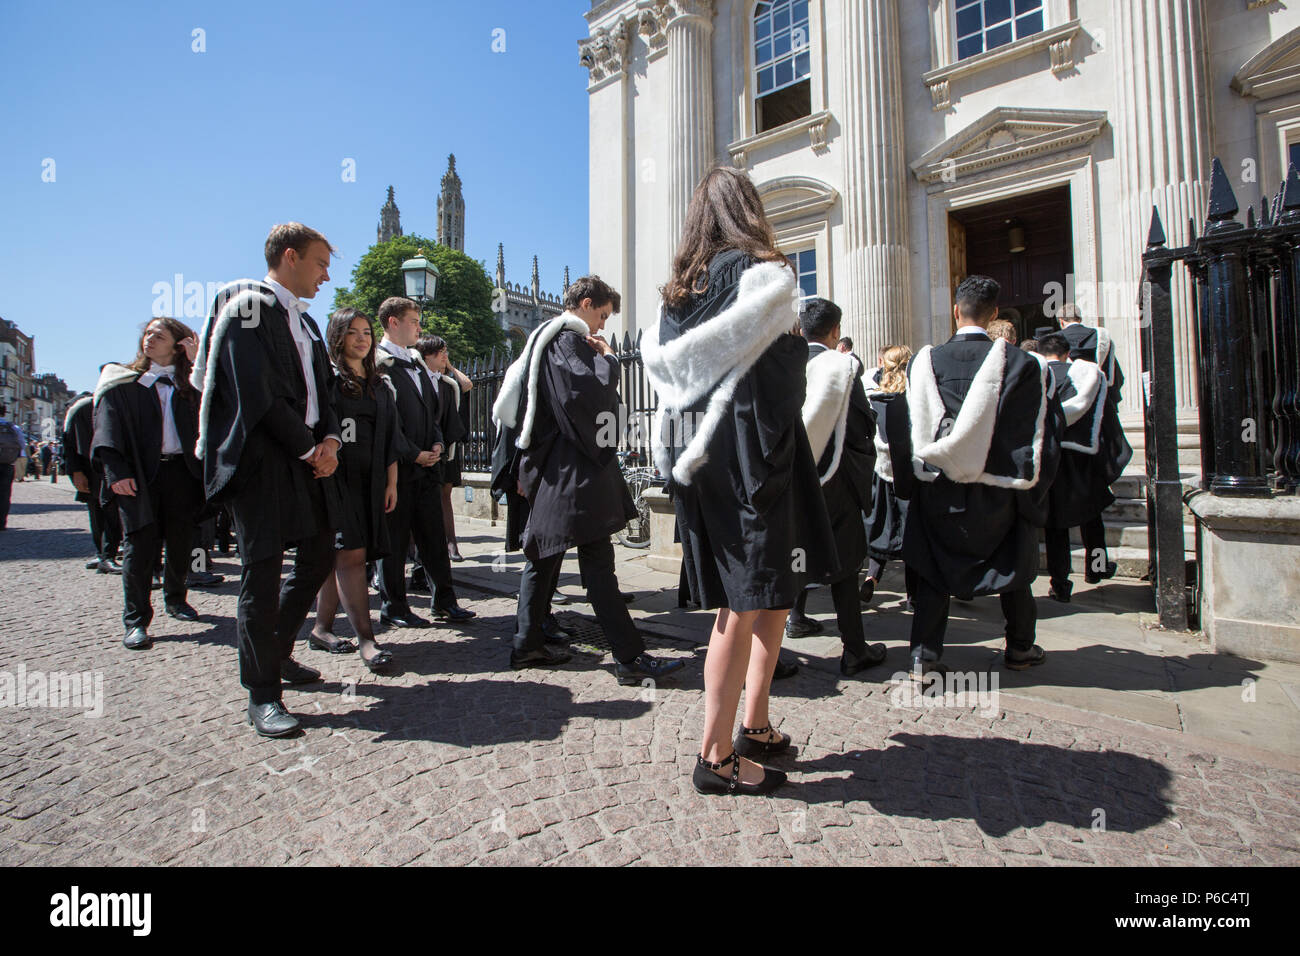 students from cambridge university on their way to the senate house